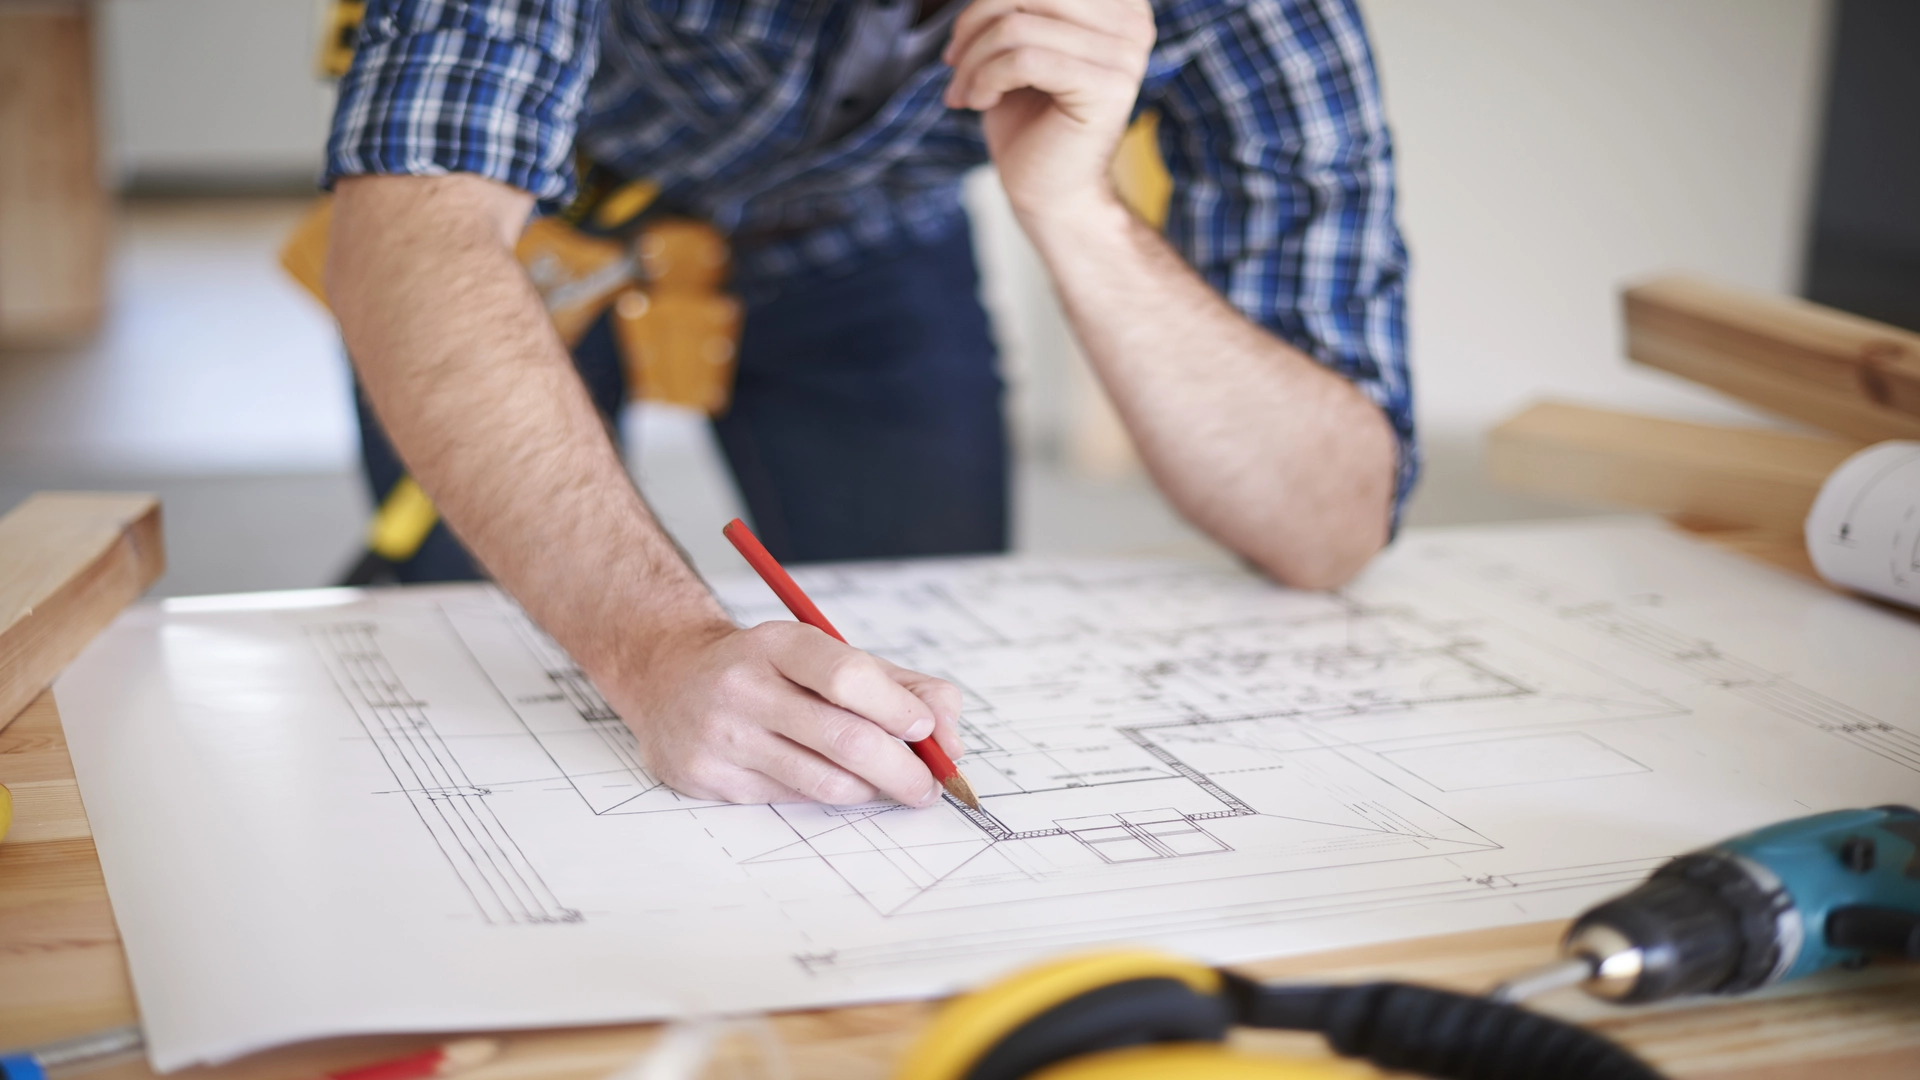 Blue prints are essential for building family home plans including bedrooms, bathrooms, garage